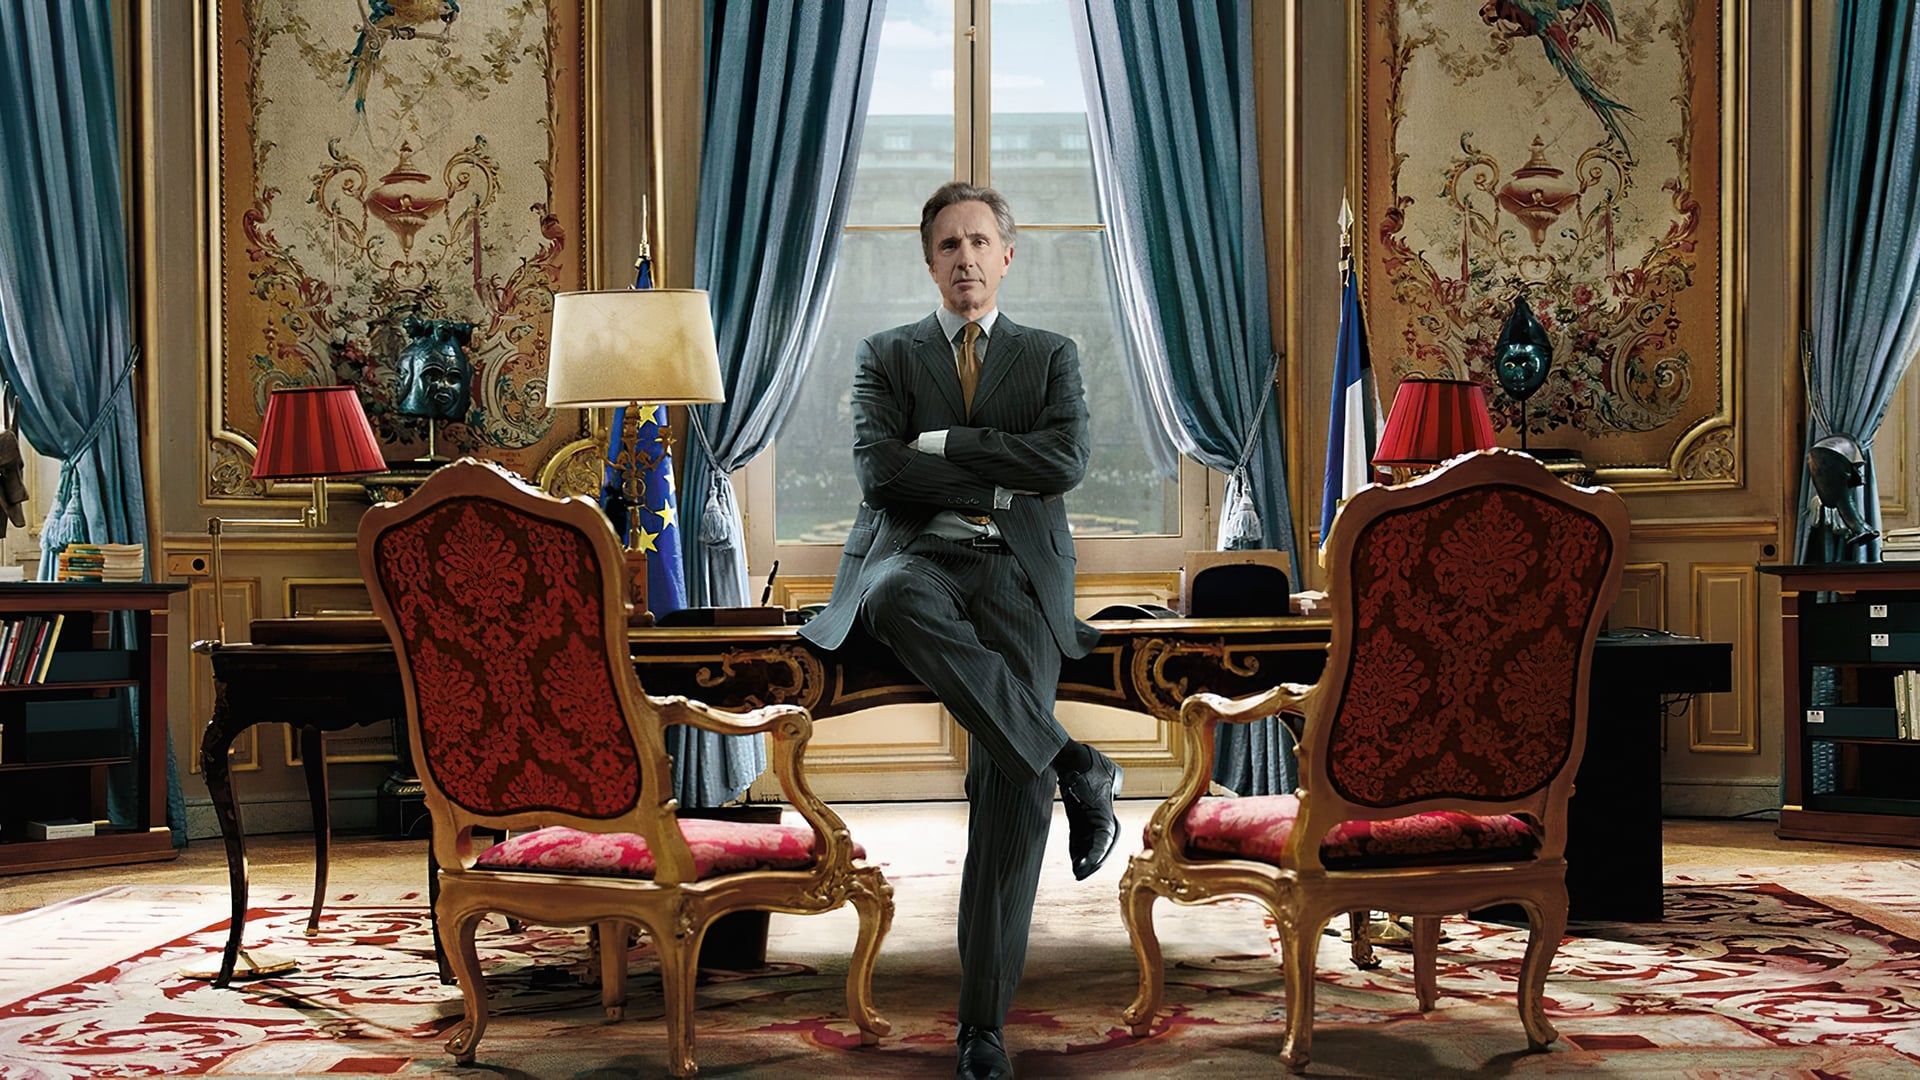 The French Minister background